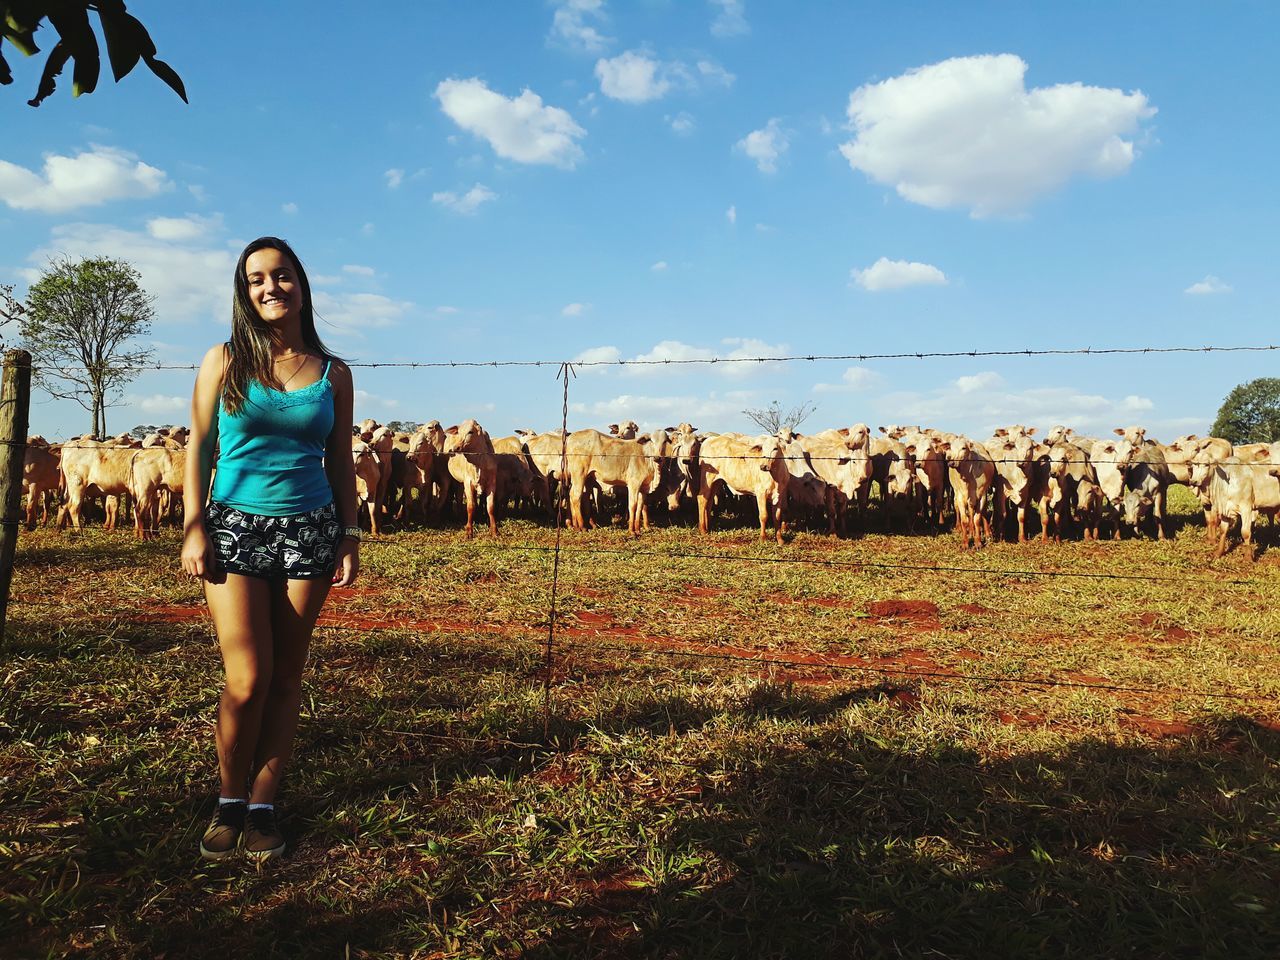 animal themes, domestic animals, sky, standing, livestock, field, outdoors, real people, mammal, day, one person, full length, young adult, large group of animals, portrait, young women, grass, nature, people